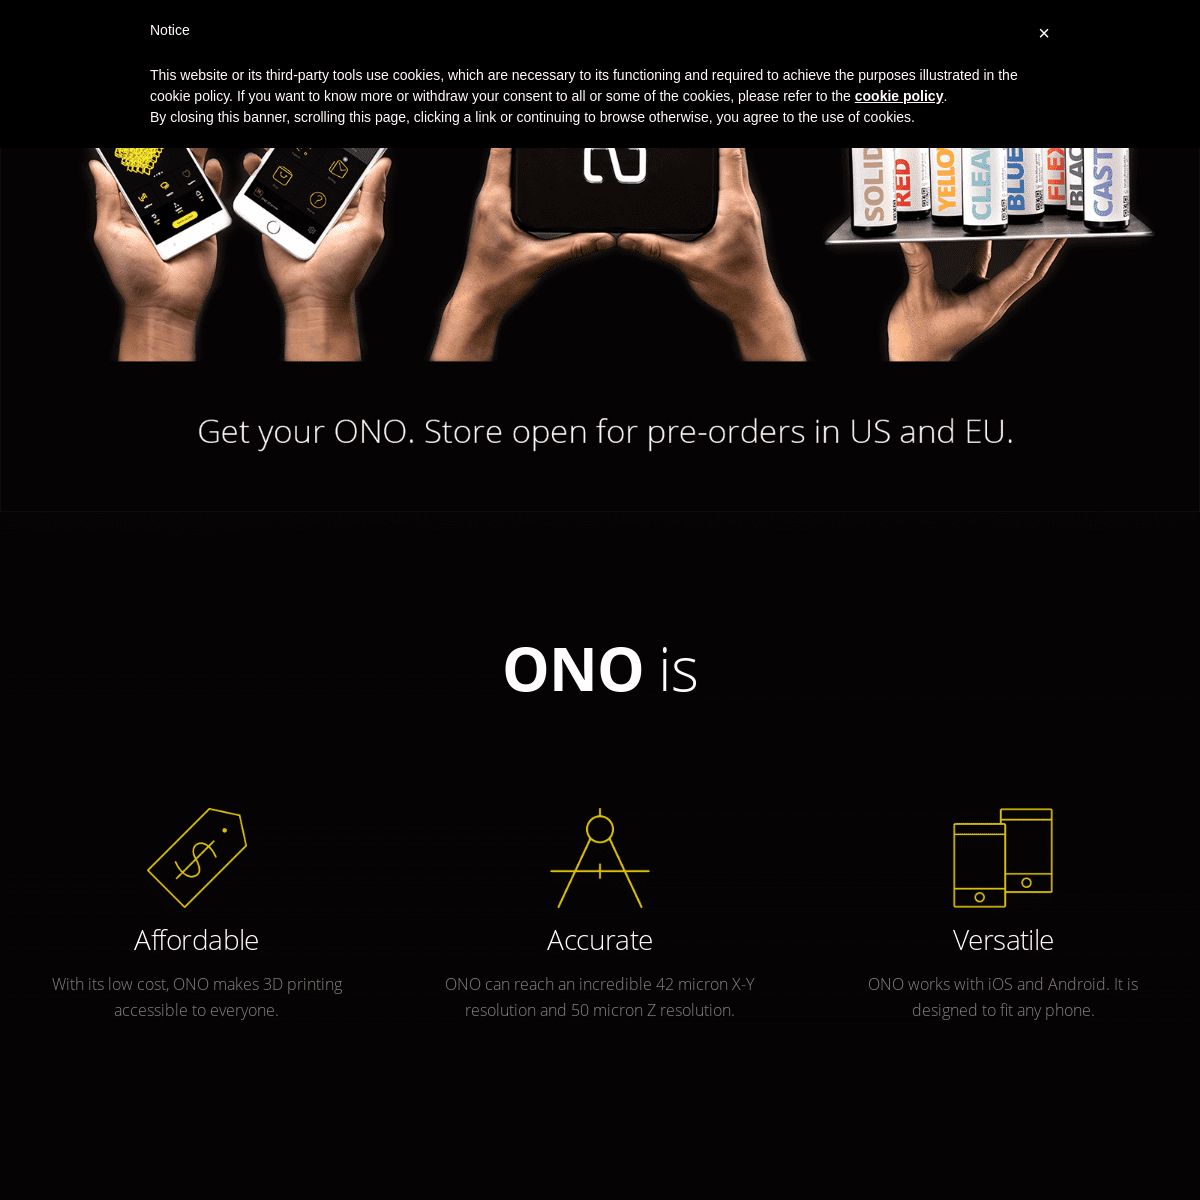 ONO The first ever smartphone 3D printer